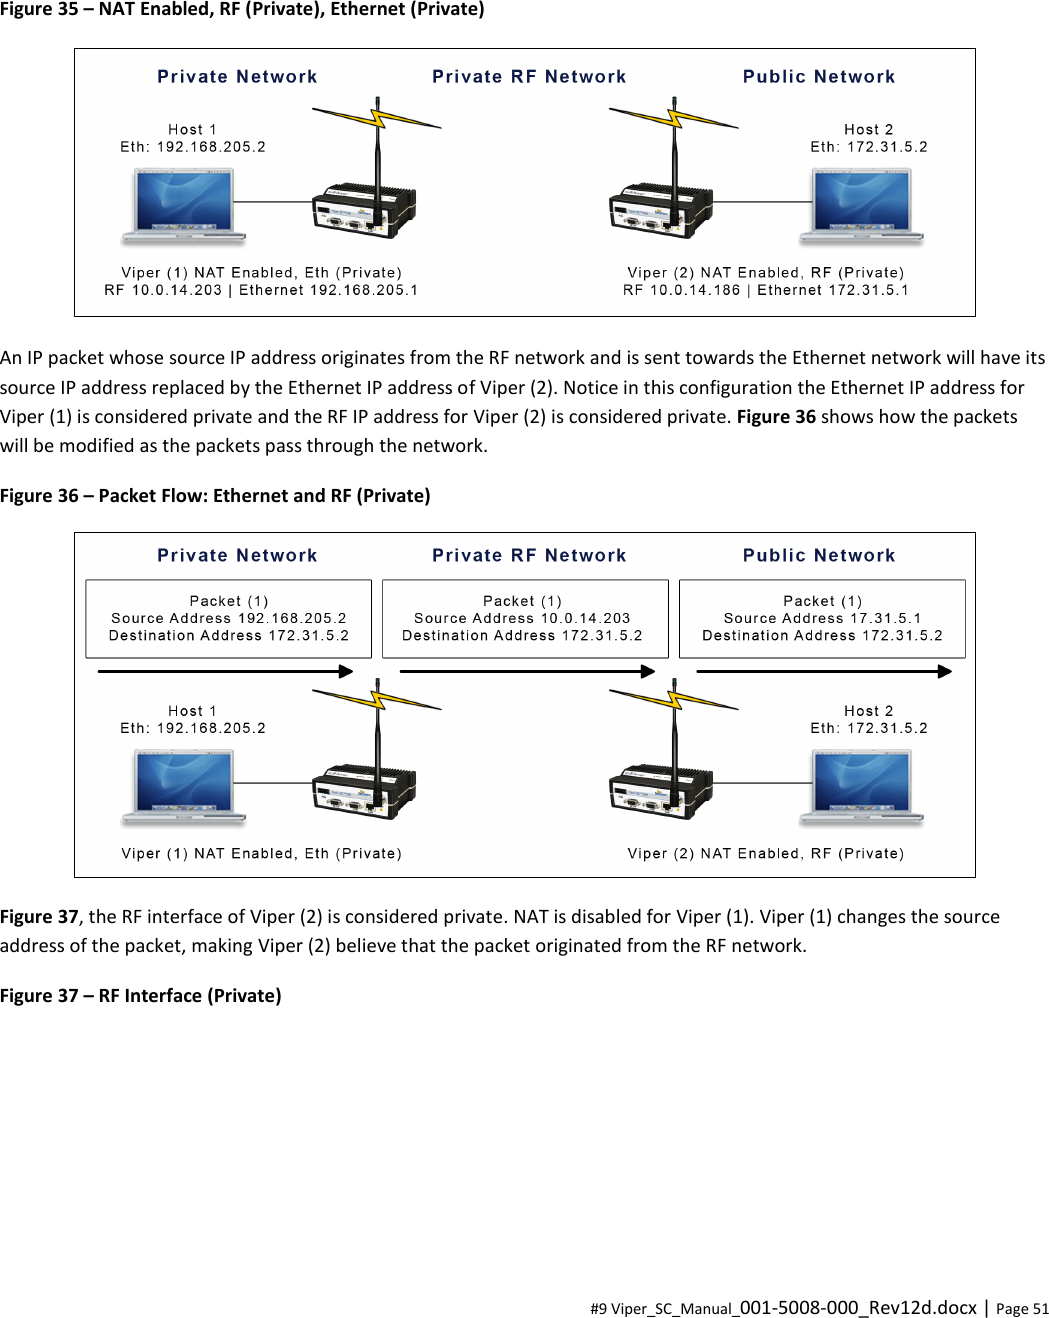  #9 Viper_SC_Manual_001-5008-000_Rev12d.docx | Page 51   Figure 35 – NAT Enabled, RF (Private), Ethernet (Private)  An IP packet whose source IP address originates from the RF network and is sent towards the Ethernet network will have its source IP address replaced by the Ethernet IP address of Viper (2). Notice in this configuration the Ethernet IP address for Viper (1) is considered private and the RF IP address for Viper (2) is considered private. Figure 36 shows how the packets will be modified as the packets pass through the network. Figure 36 – Packet Flow: Ethernet and RF (Private)   Figure 37, the RF interface of Viper (2) is considered private. NAT is disabled for Viper (1). Viper (1) changes the source address of the packet, making Viper (2) believe that the packet originated from the RF network. Figure 37 – RF Interface (Private) 